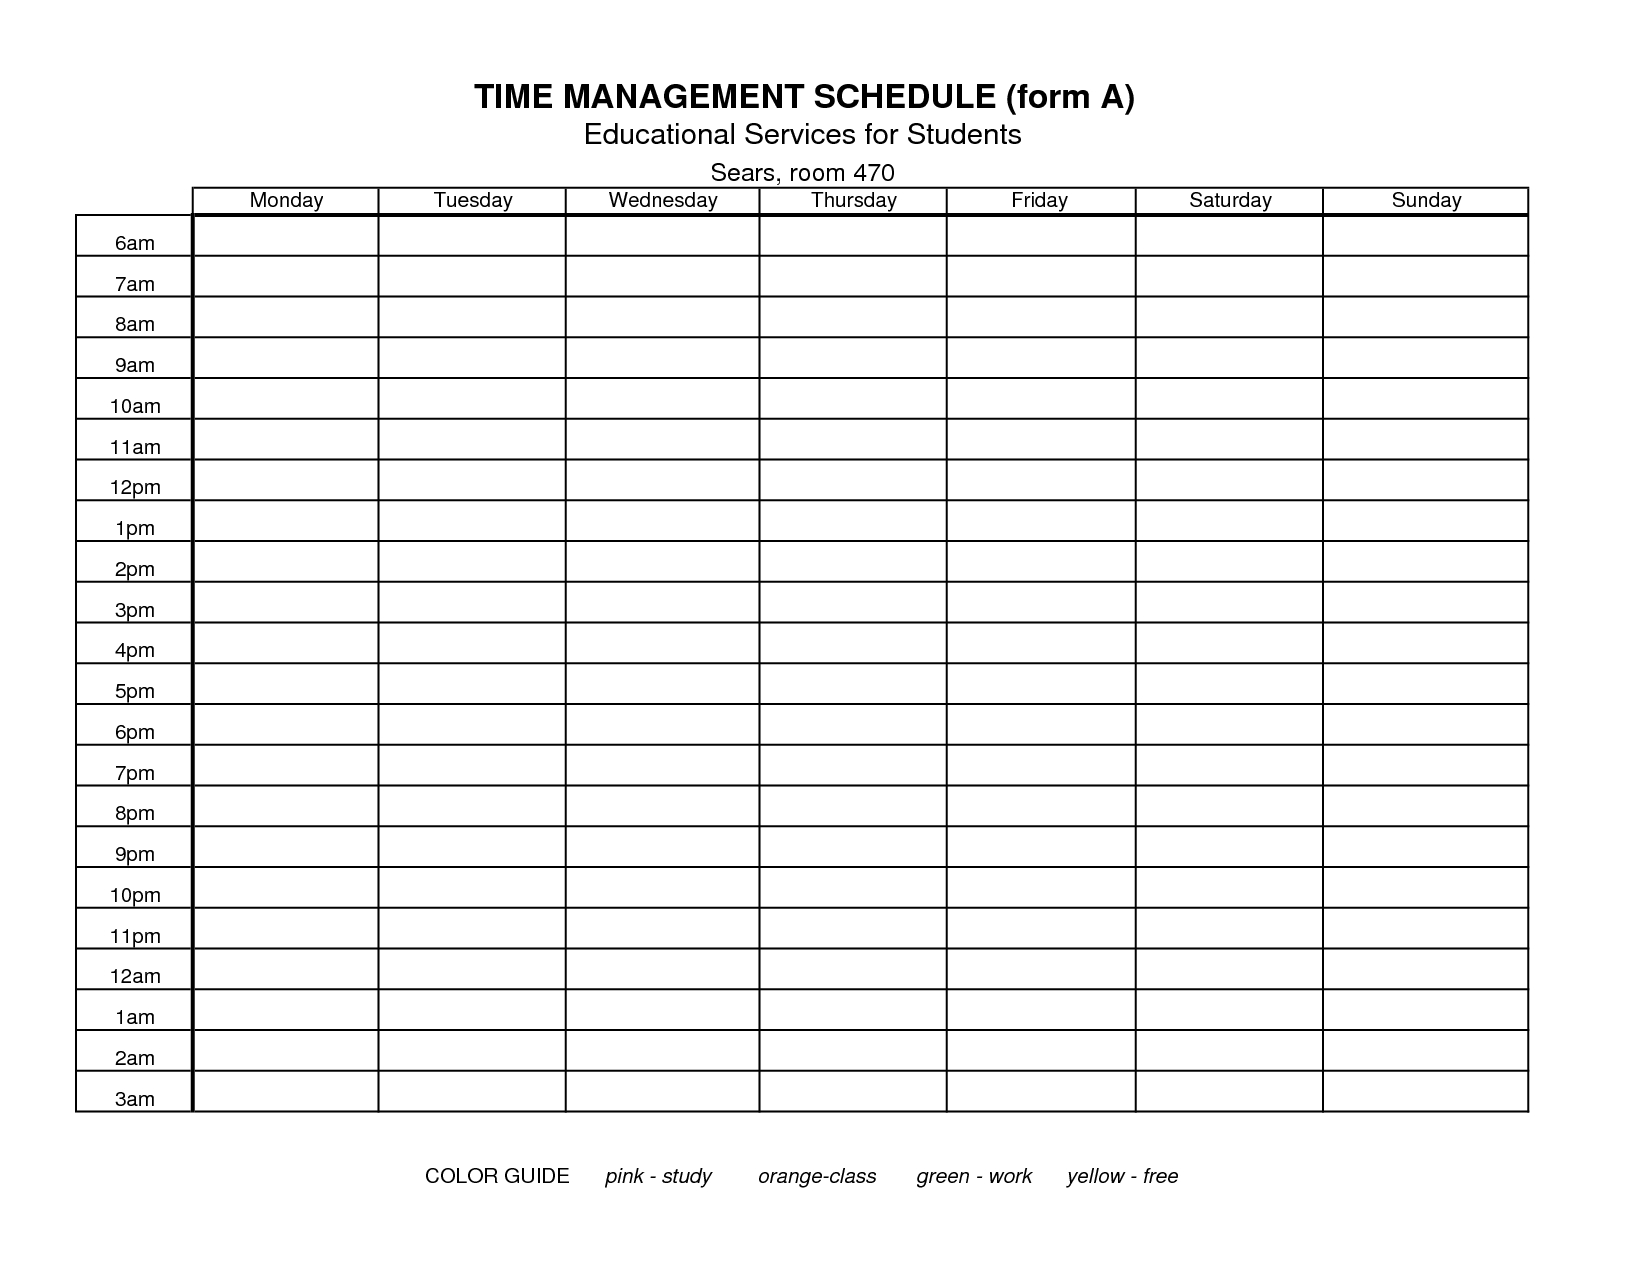 Ftu Schedule Template. (Found Free On The Www. I Do Not Own